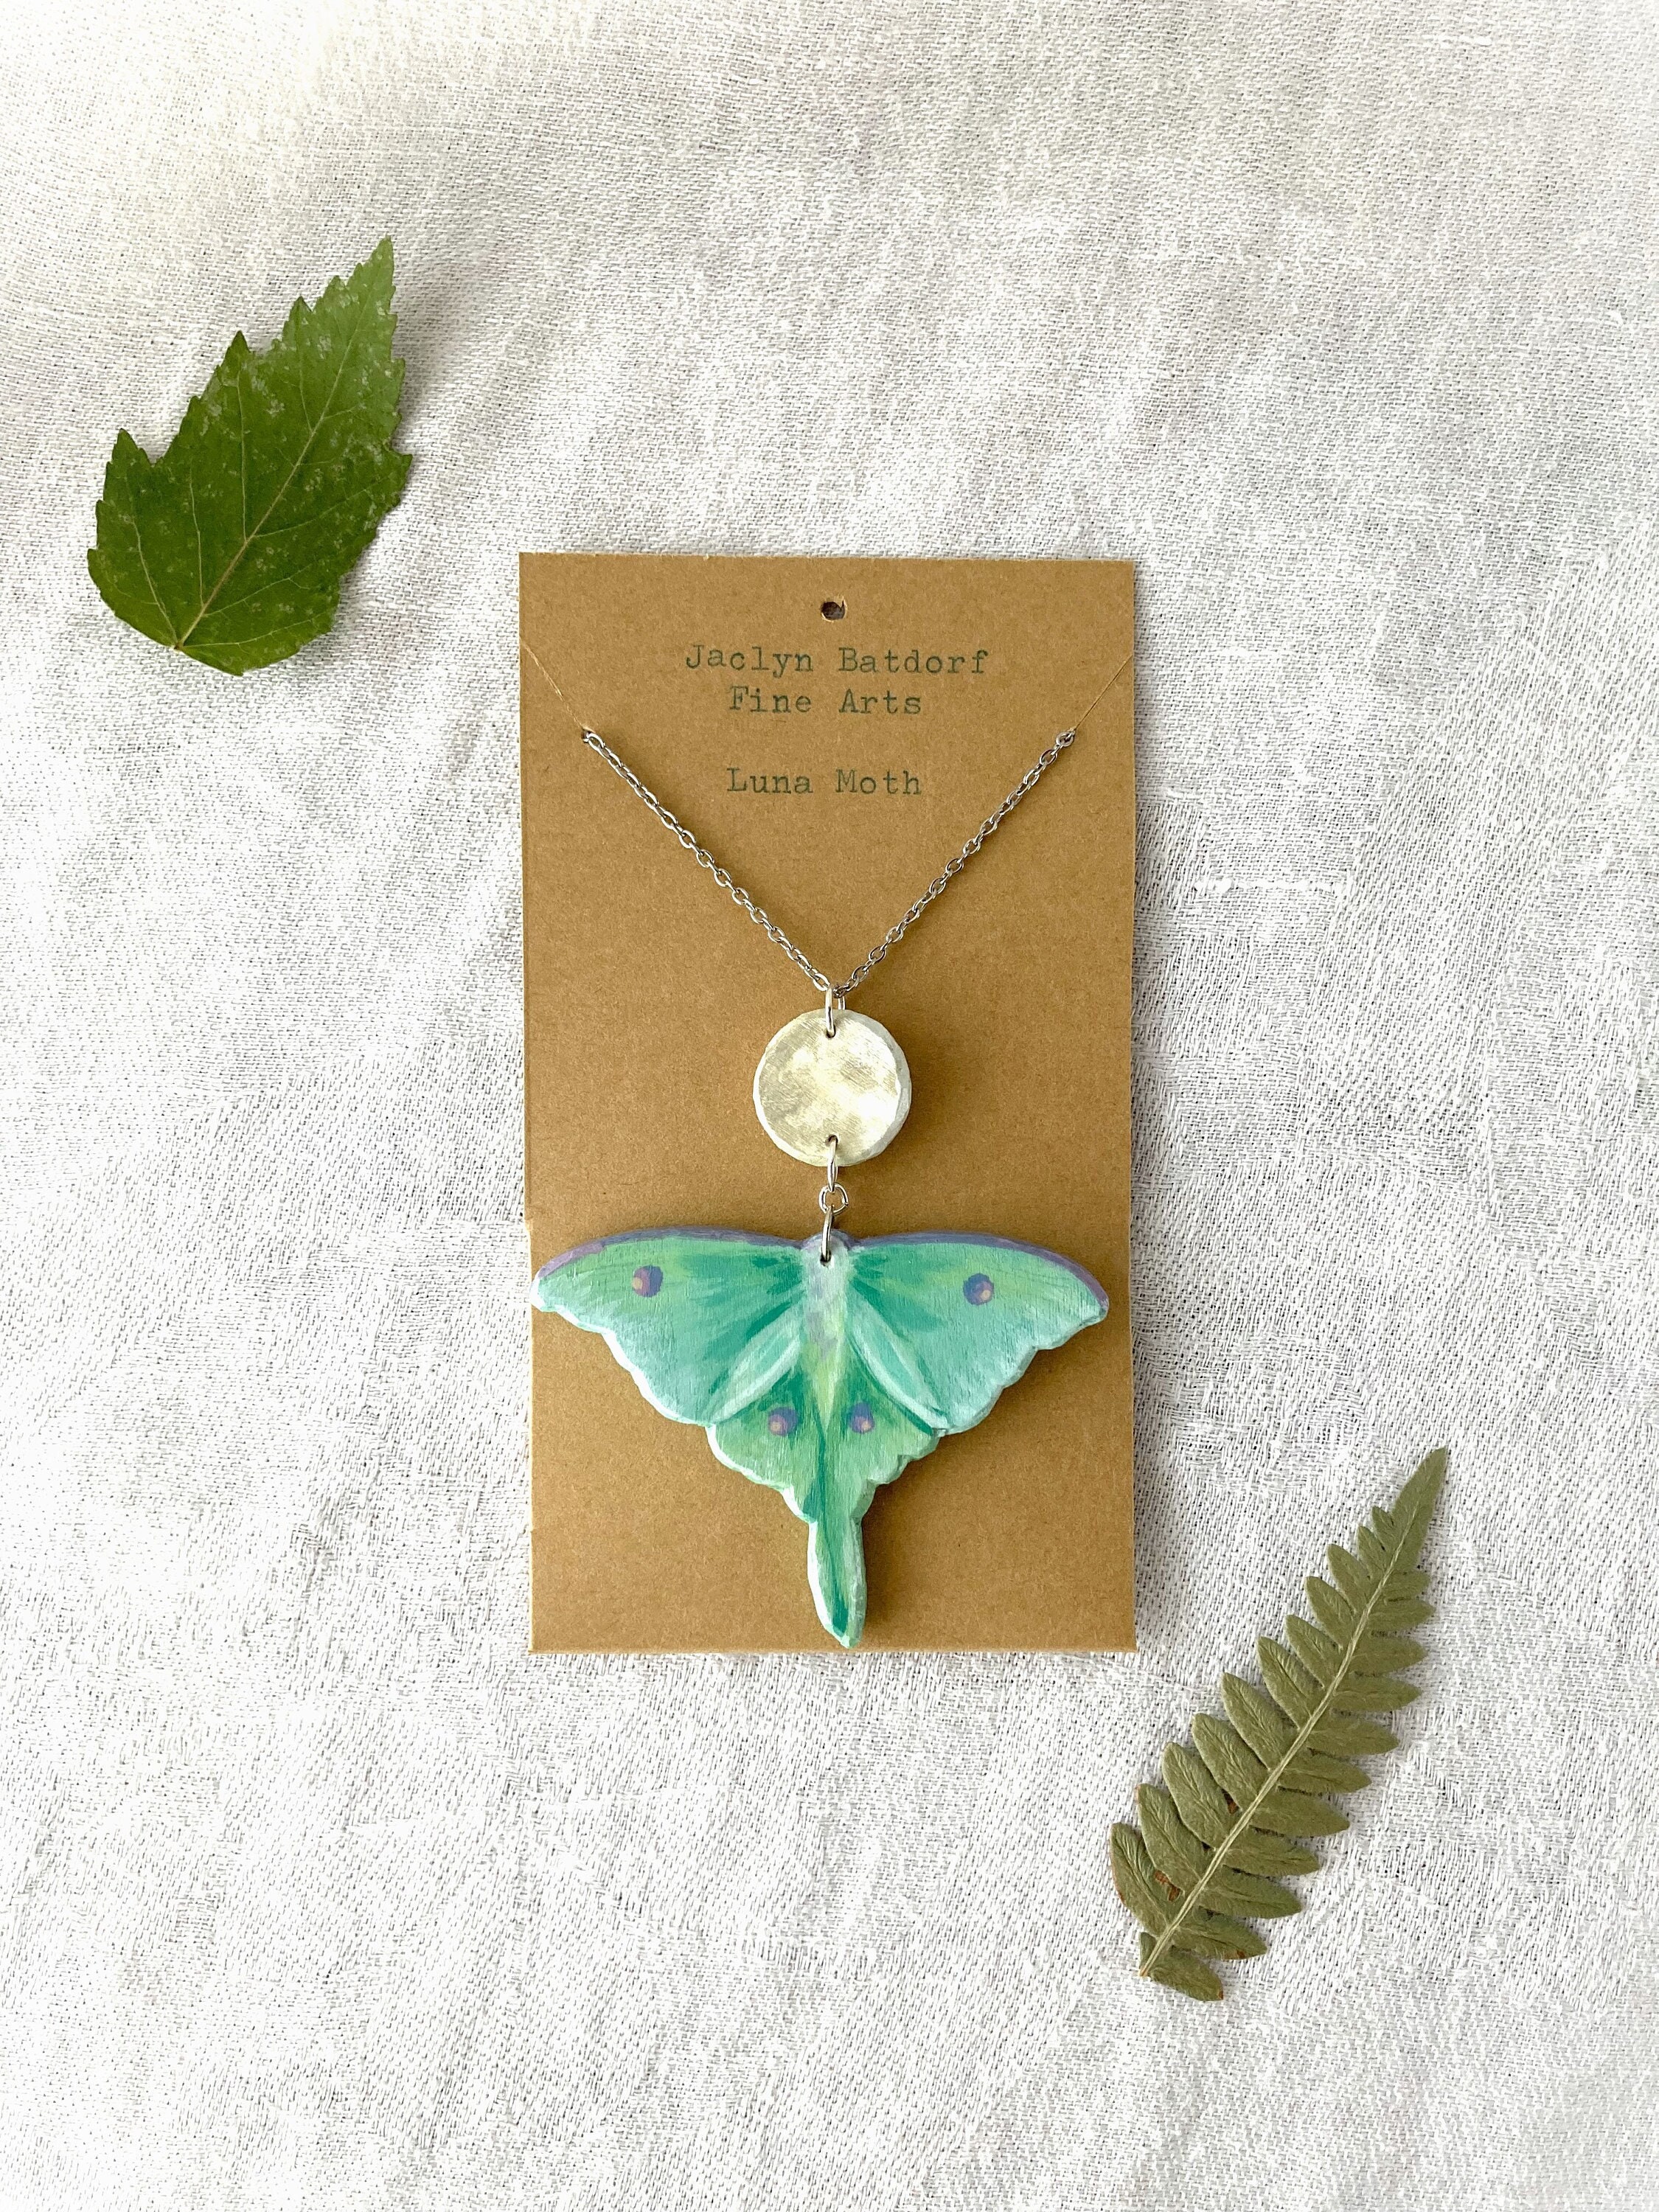 made this little luna moth necklace! : r/jewelrymaking